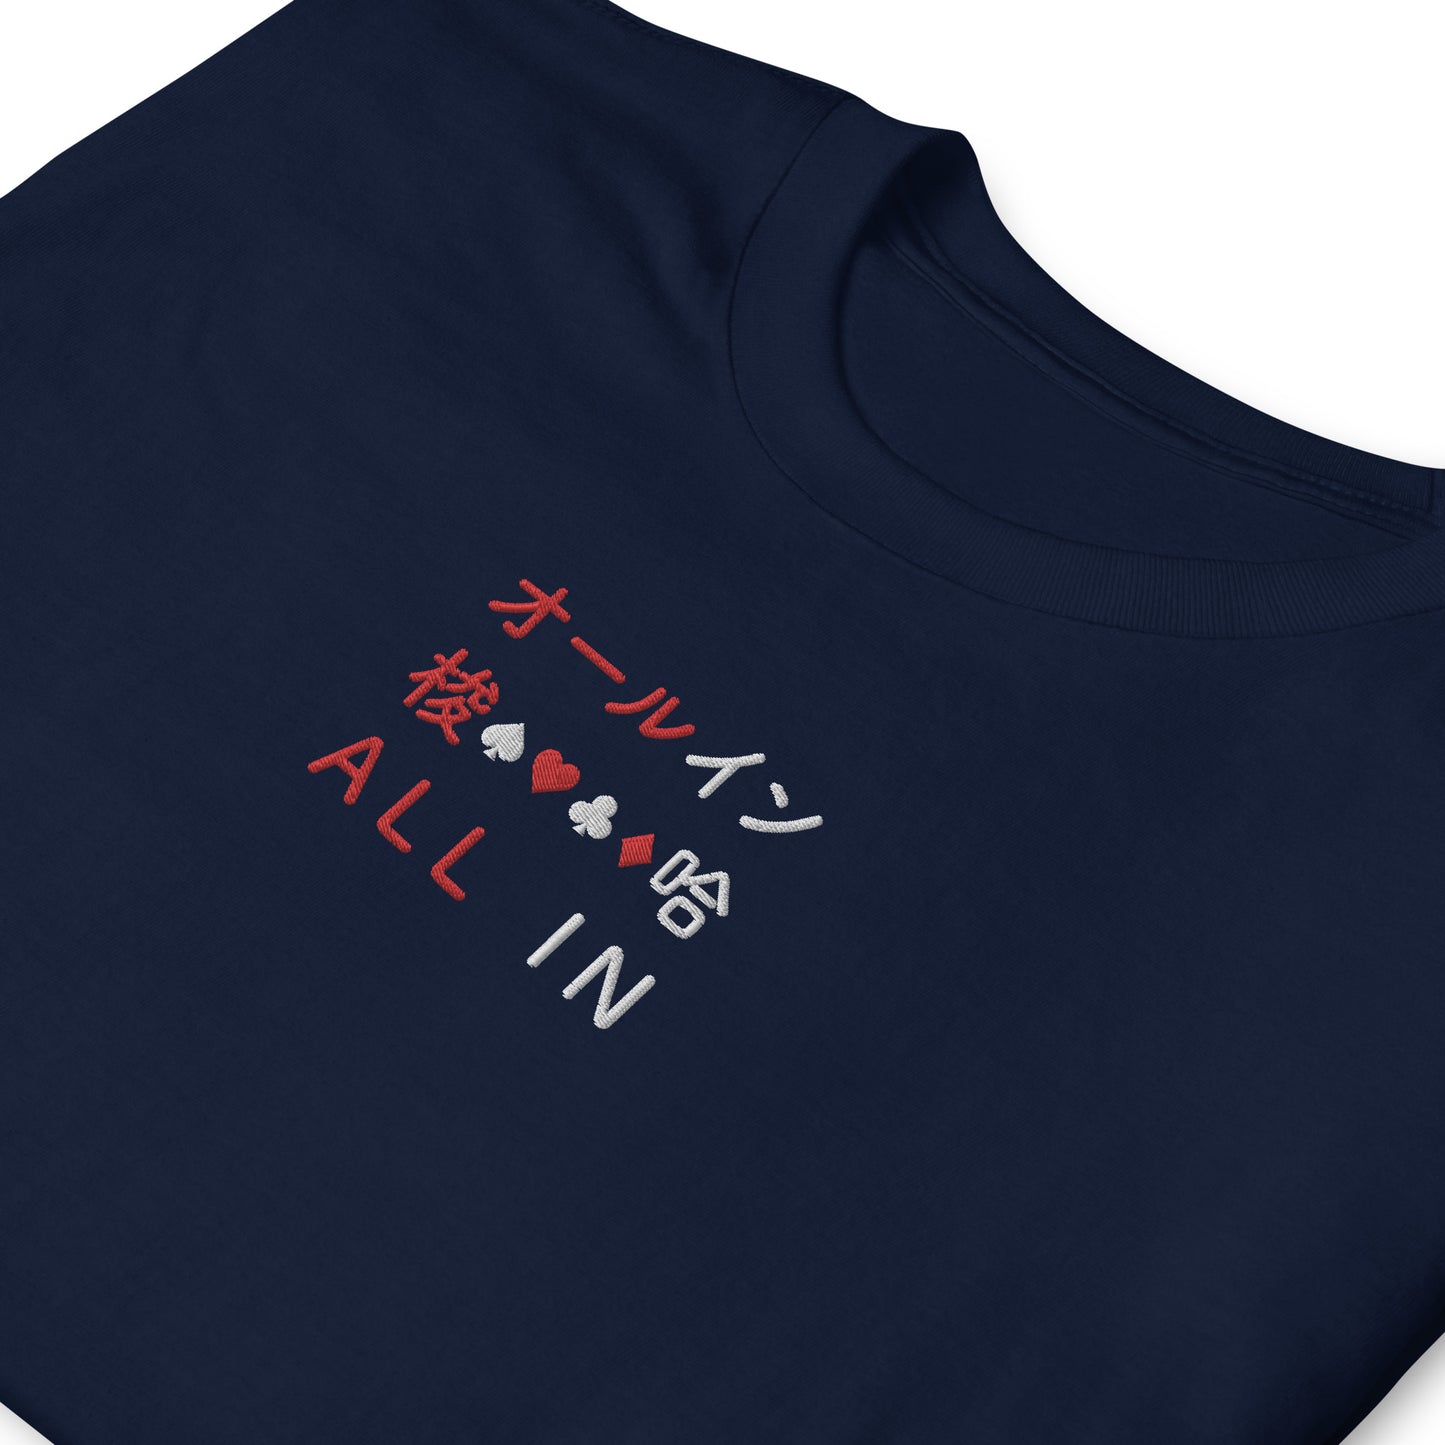 Navy High Quality Tee - Front Design with an Red, White Embroidery "All IN" in Japanese,Chinese and English